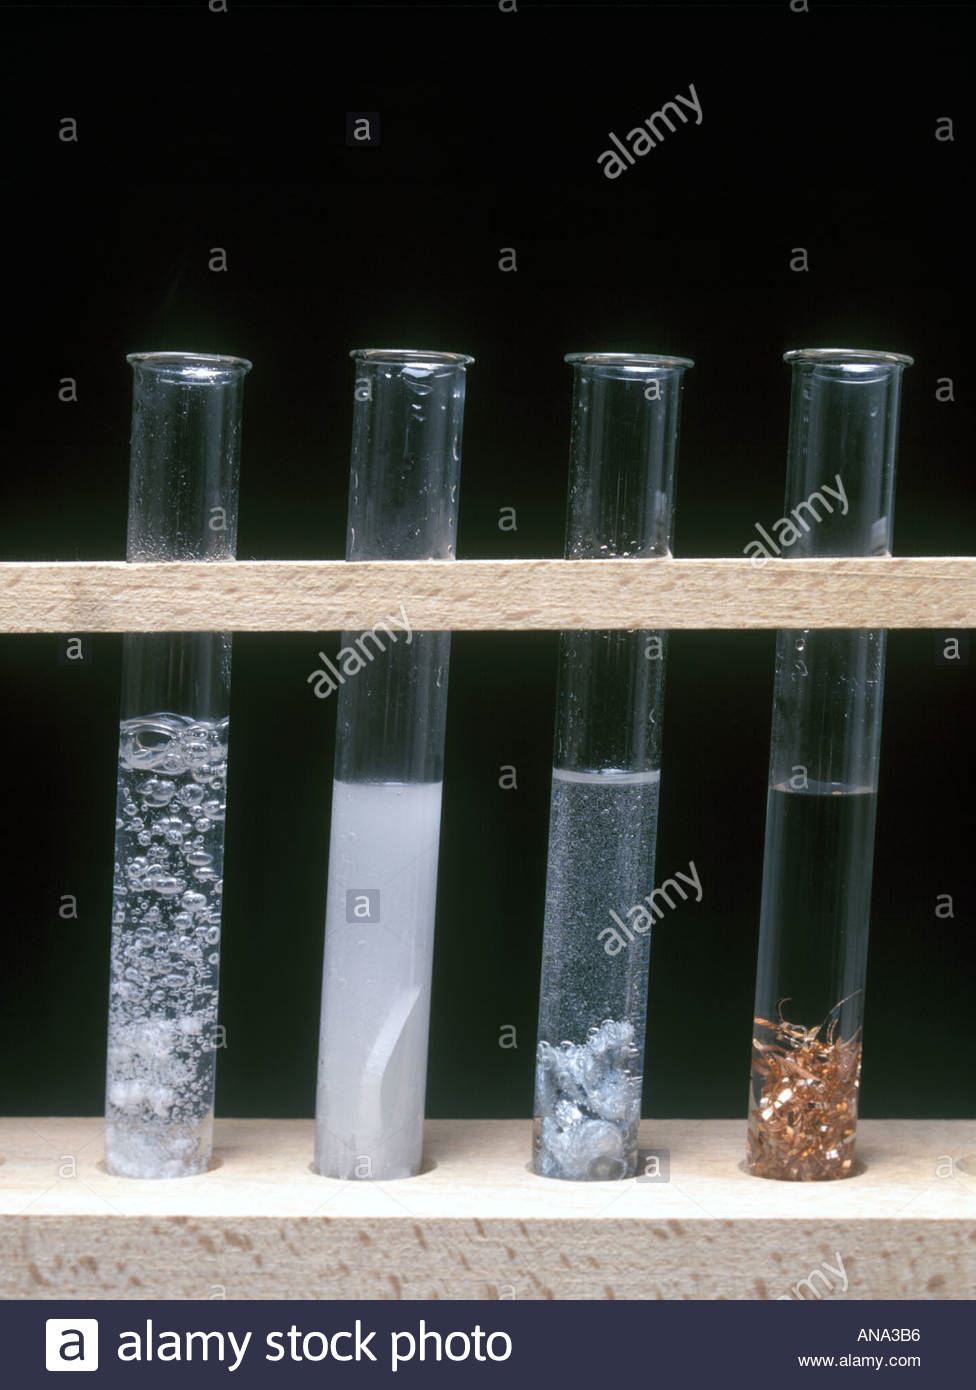 http://www.alamy.com/stock-photo-reactivity-of-different-metals-with-hydrochloric-acid-calcium-magnesium-1418165.html